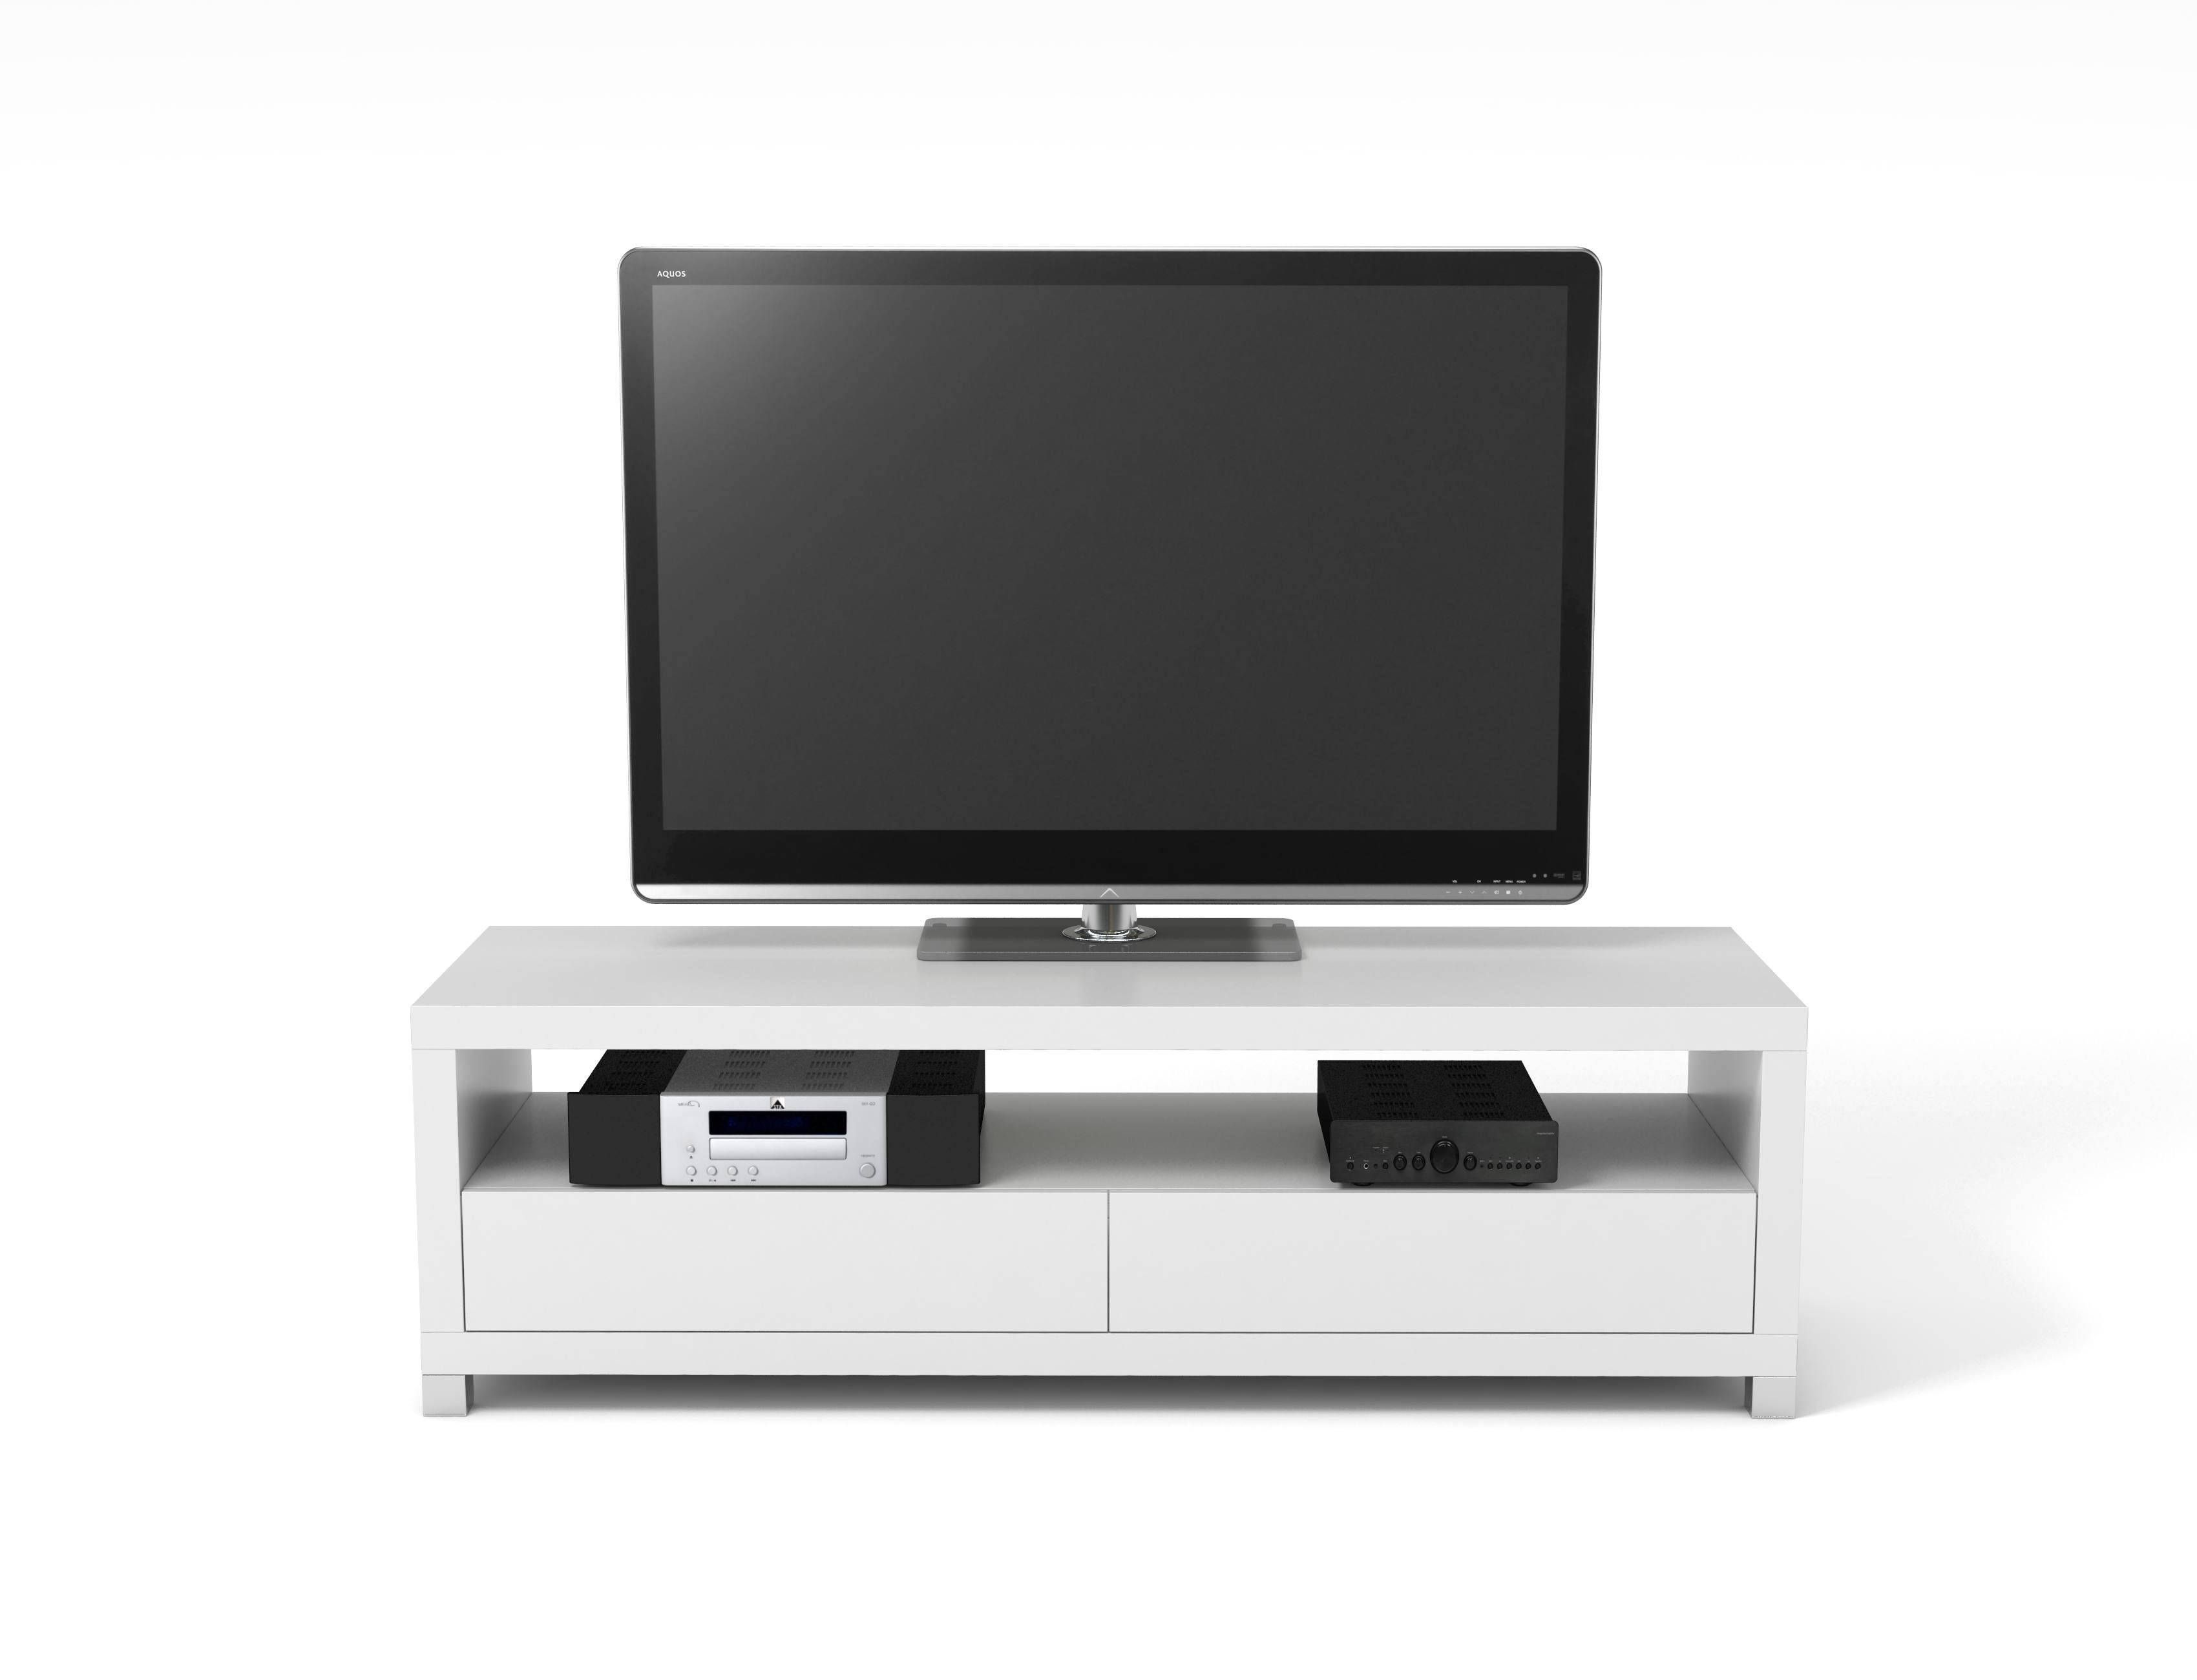 Vivanco D1200gb 120cm Designer Tv Stand White | Hbh Woolacotts For 100cm Tv Stands (View 2 of 15)